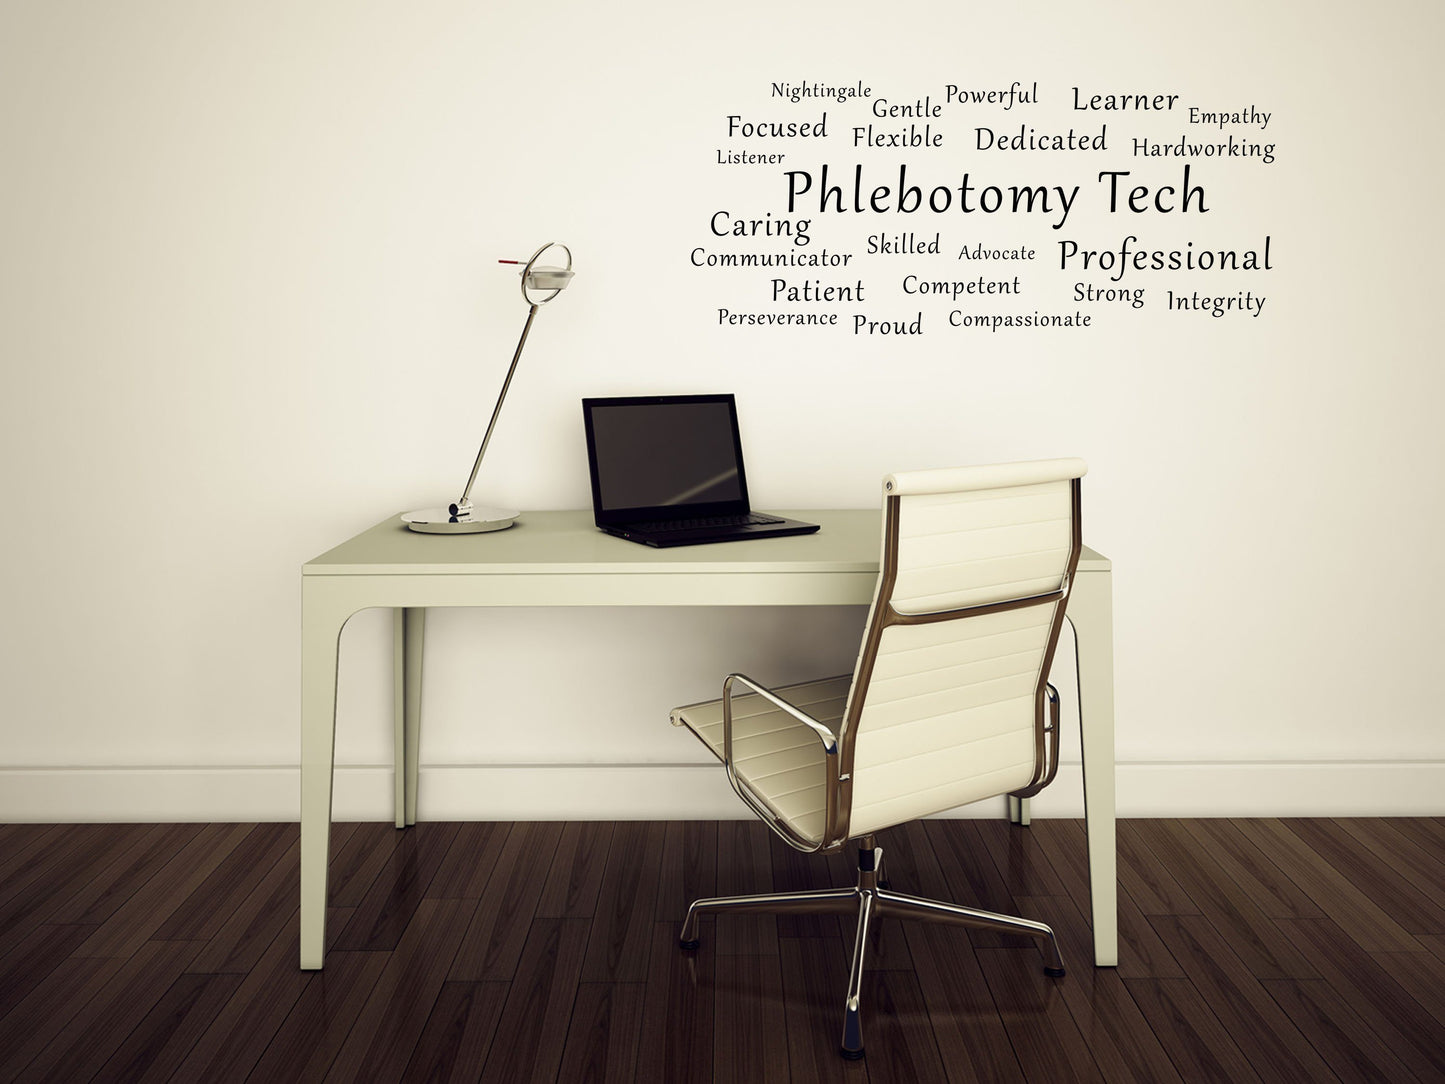 Phlebotomy Tech Word Cloud Decal - Phlebotomy Wall Decal - Phlebotomist Gift - Phlebotomist Wall Art - Phlebotomy Sign Done 